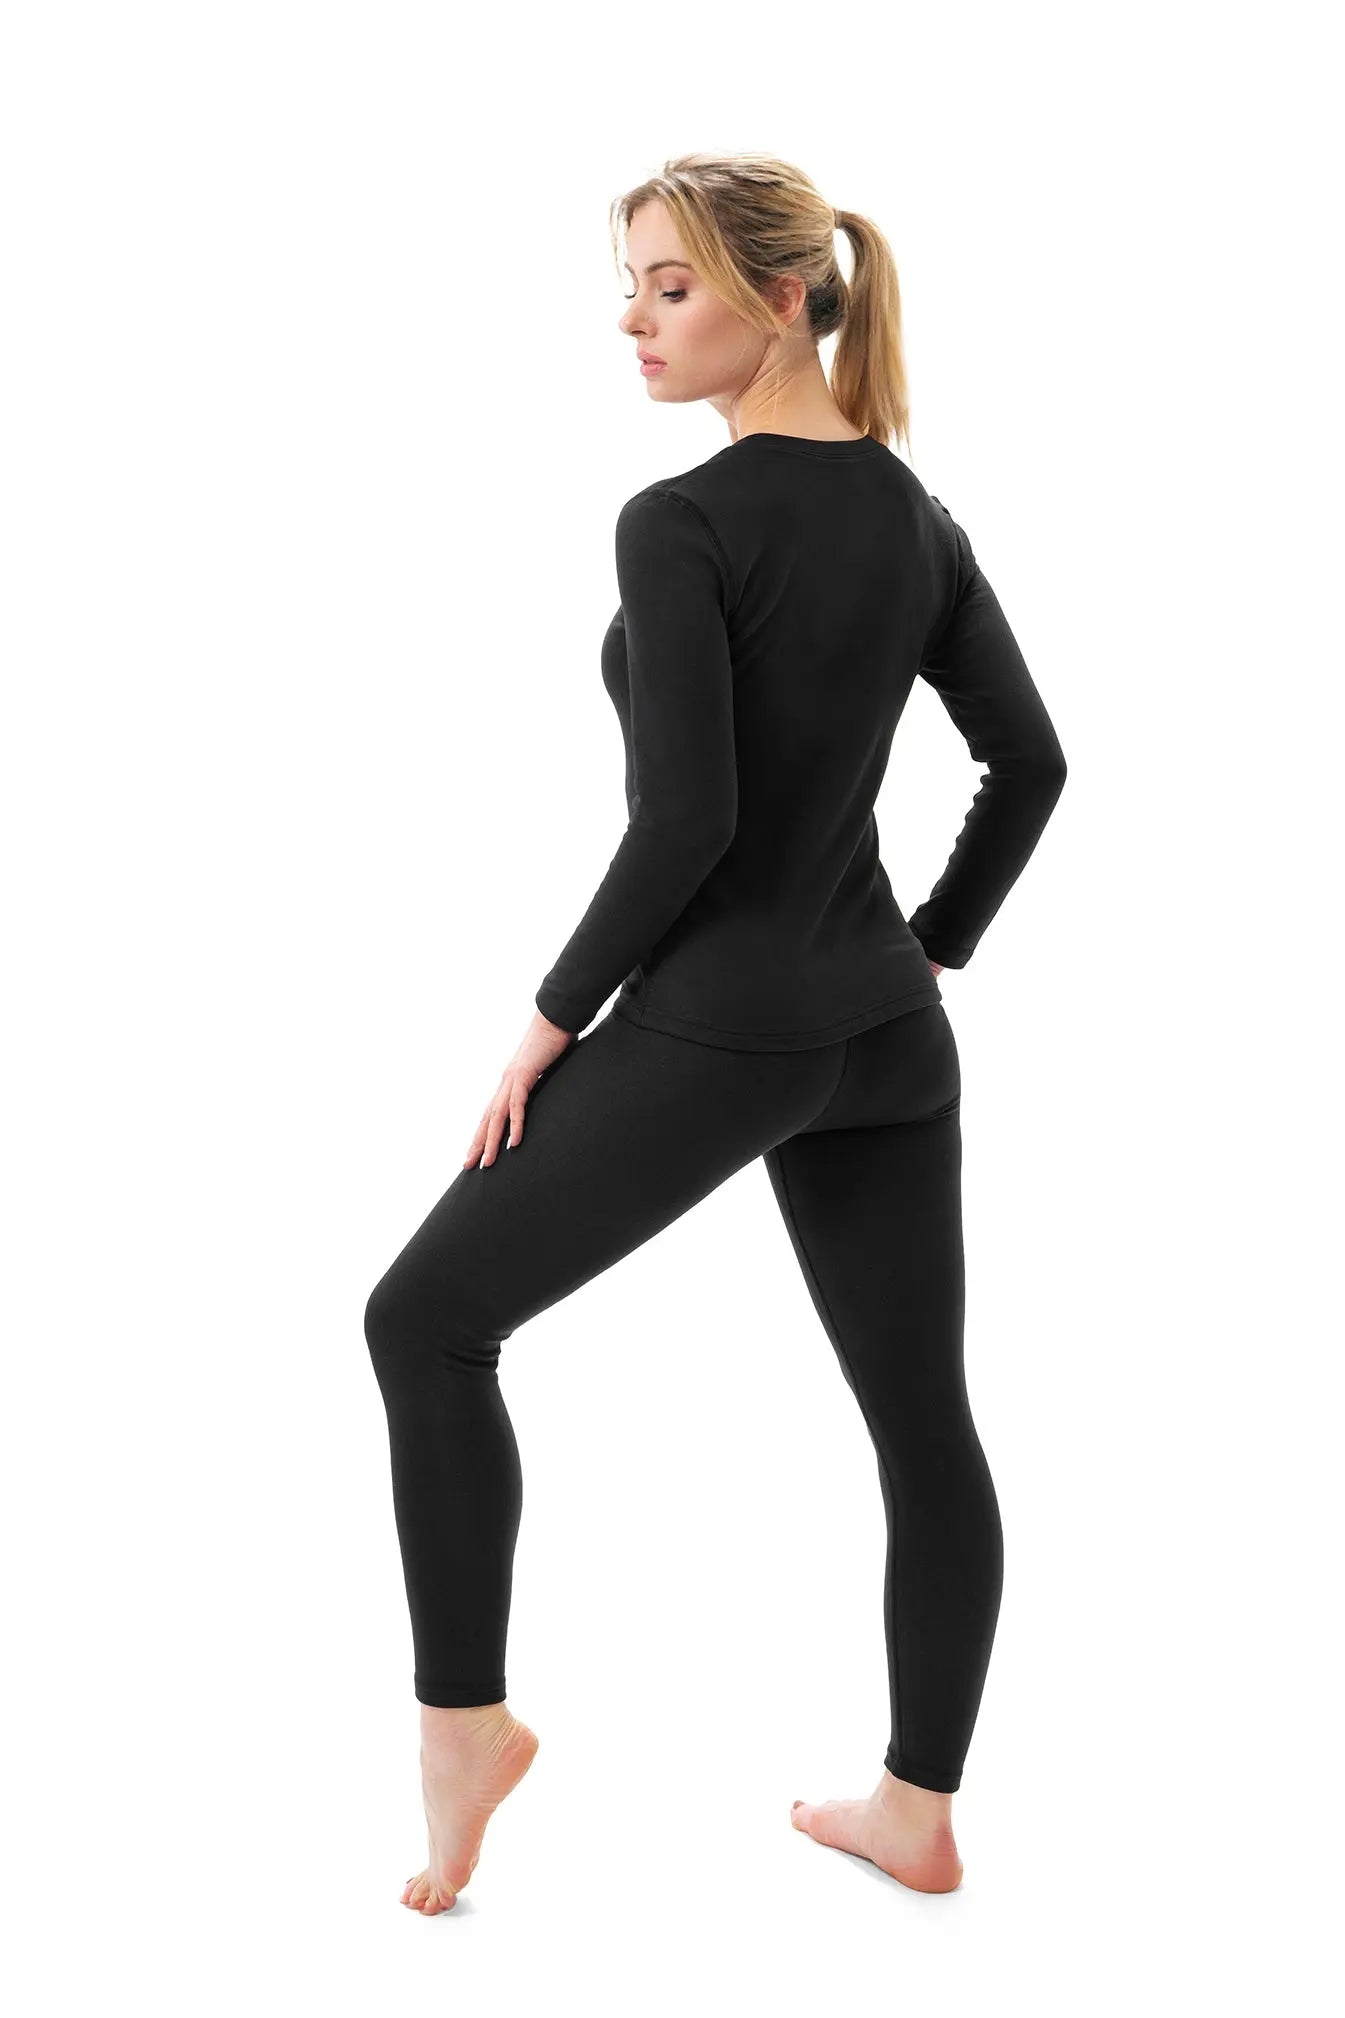 Woman in Thermal Underwear Top Ang Leggings Stock Photo - Image of